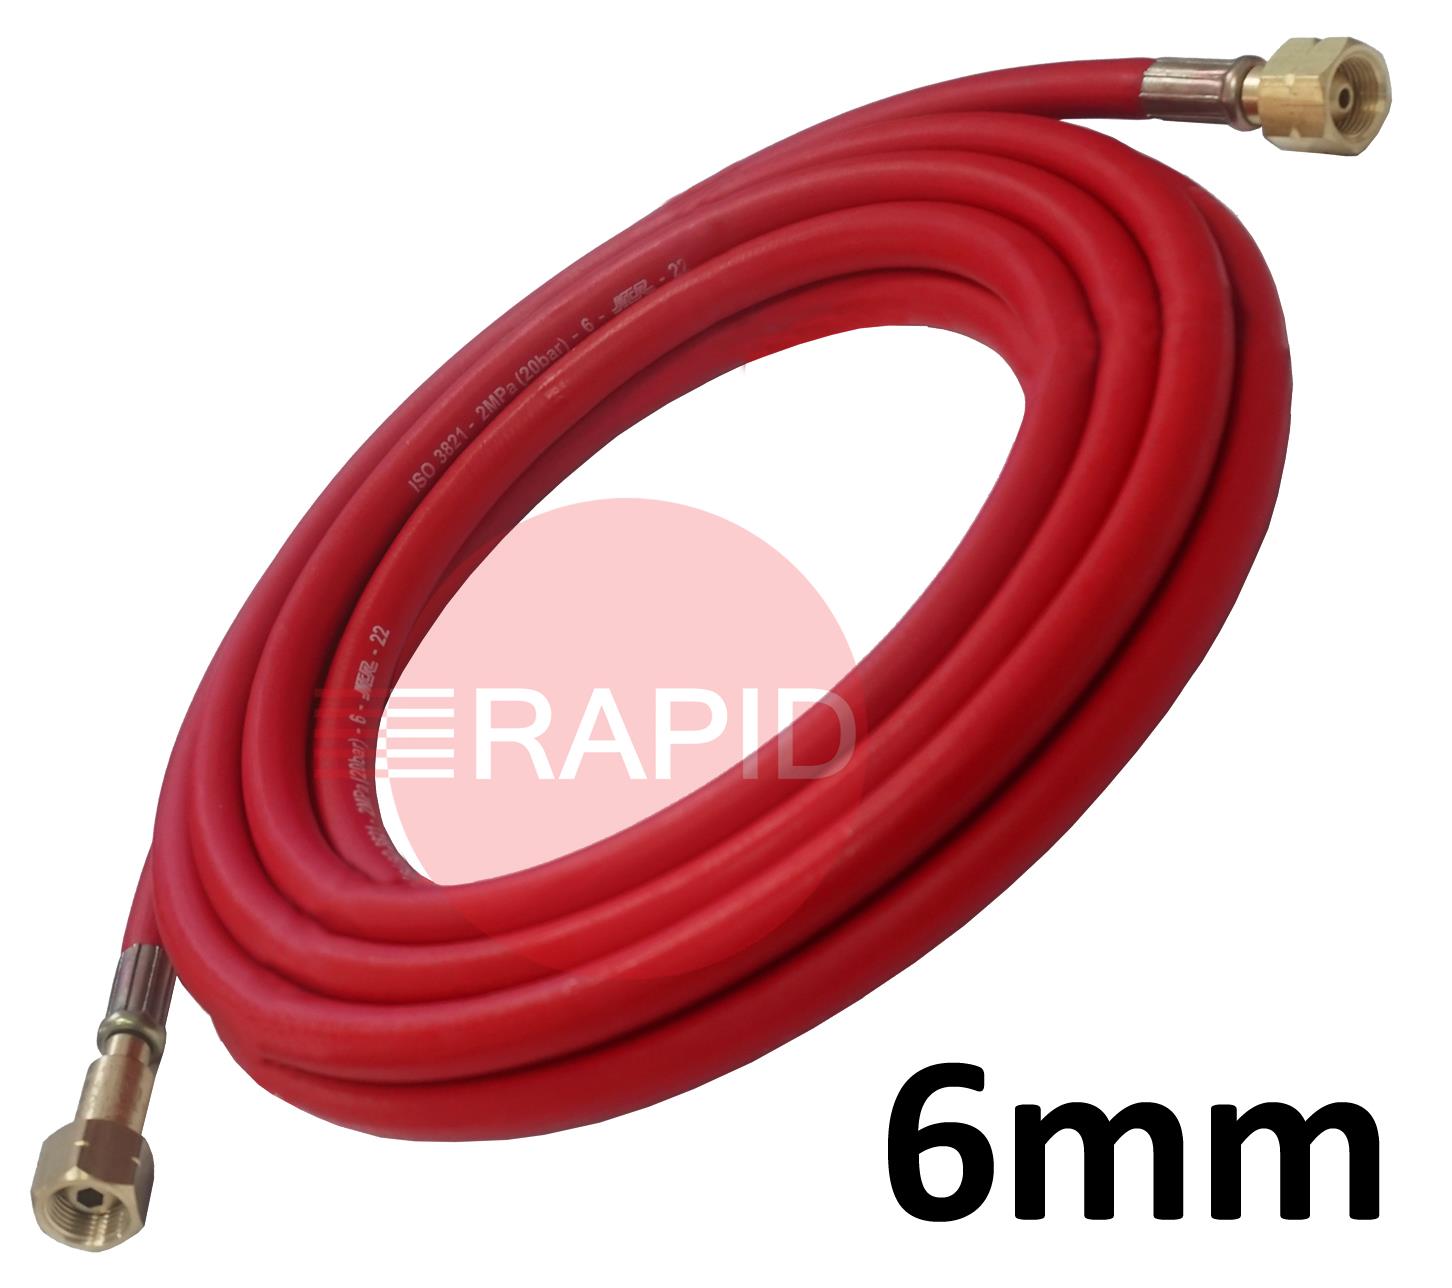 ACYHOSE6MM  Fitted Acetylene Hose. 6mm Bore. G3/8 Check Valve & G3/8 Regulator Connection